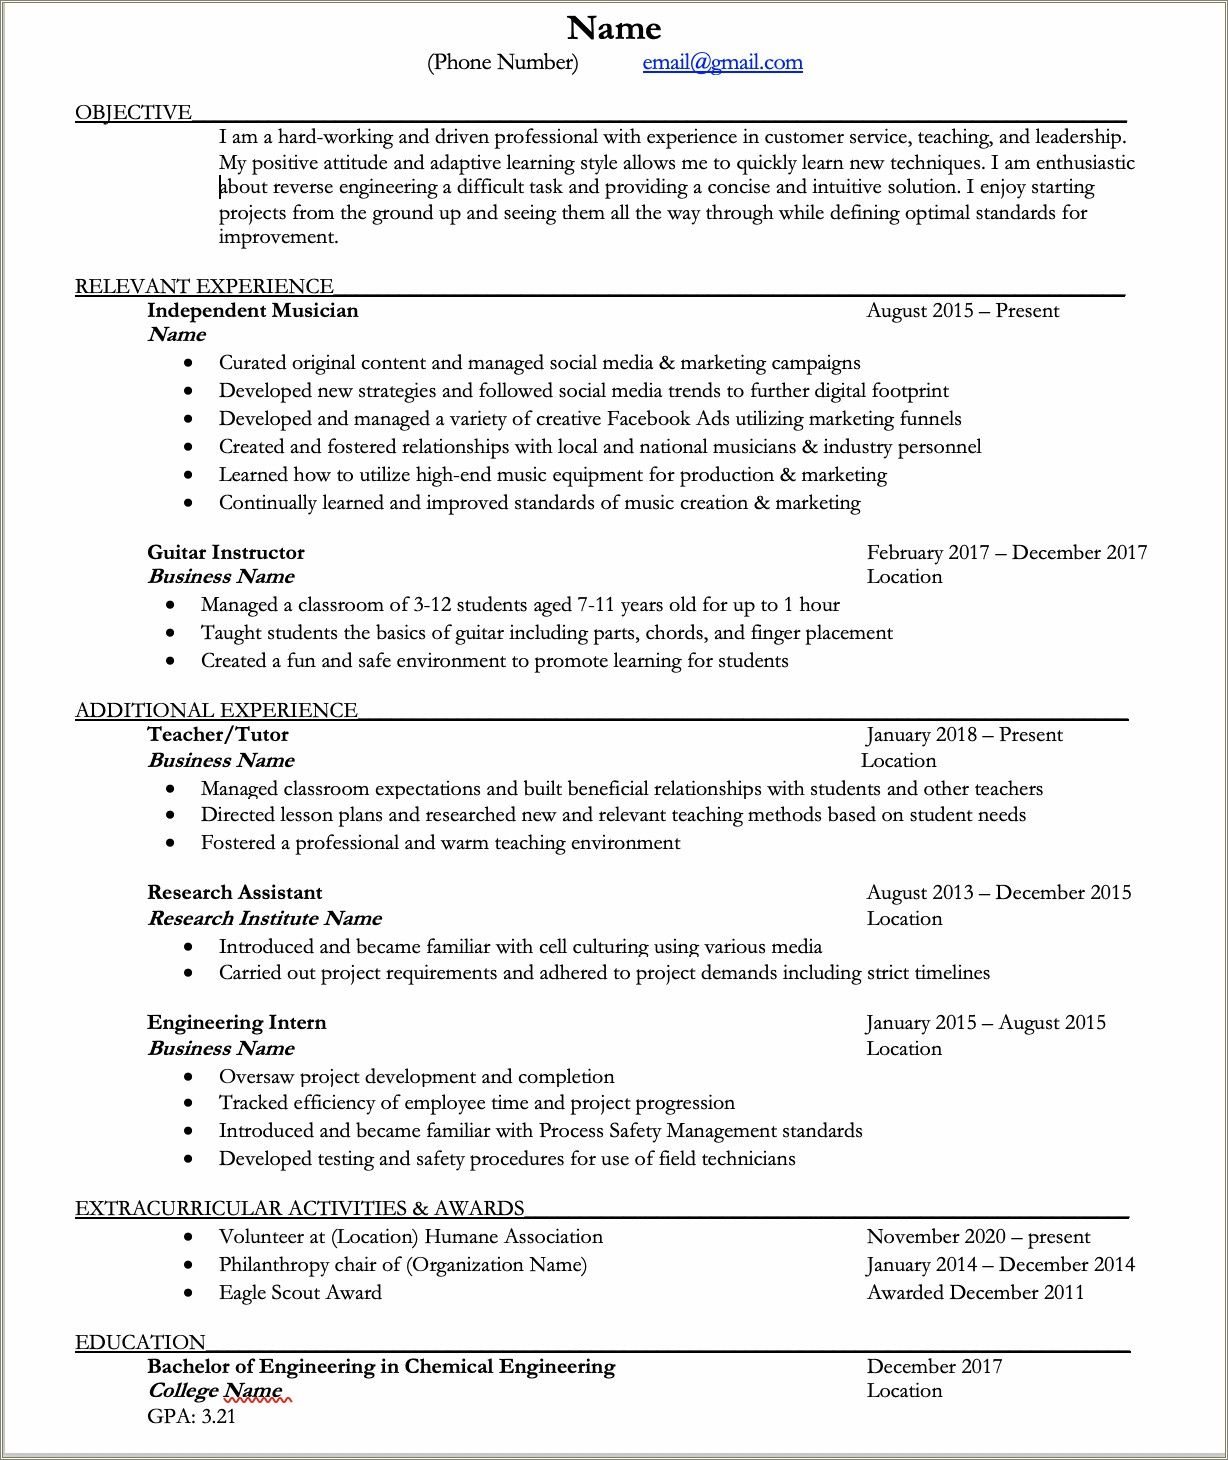 Process Safety Management Experience Resume